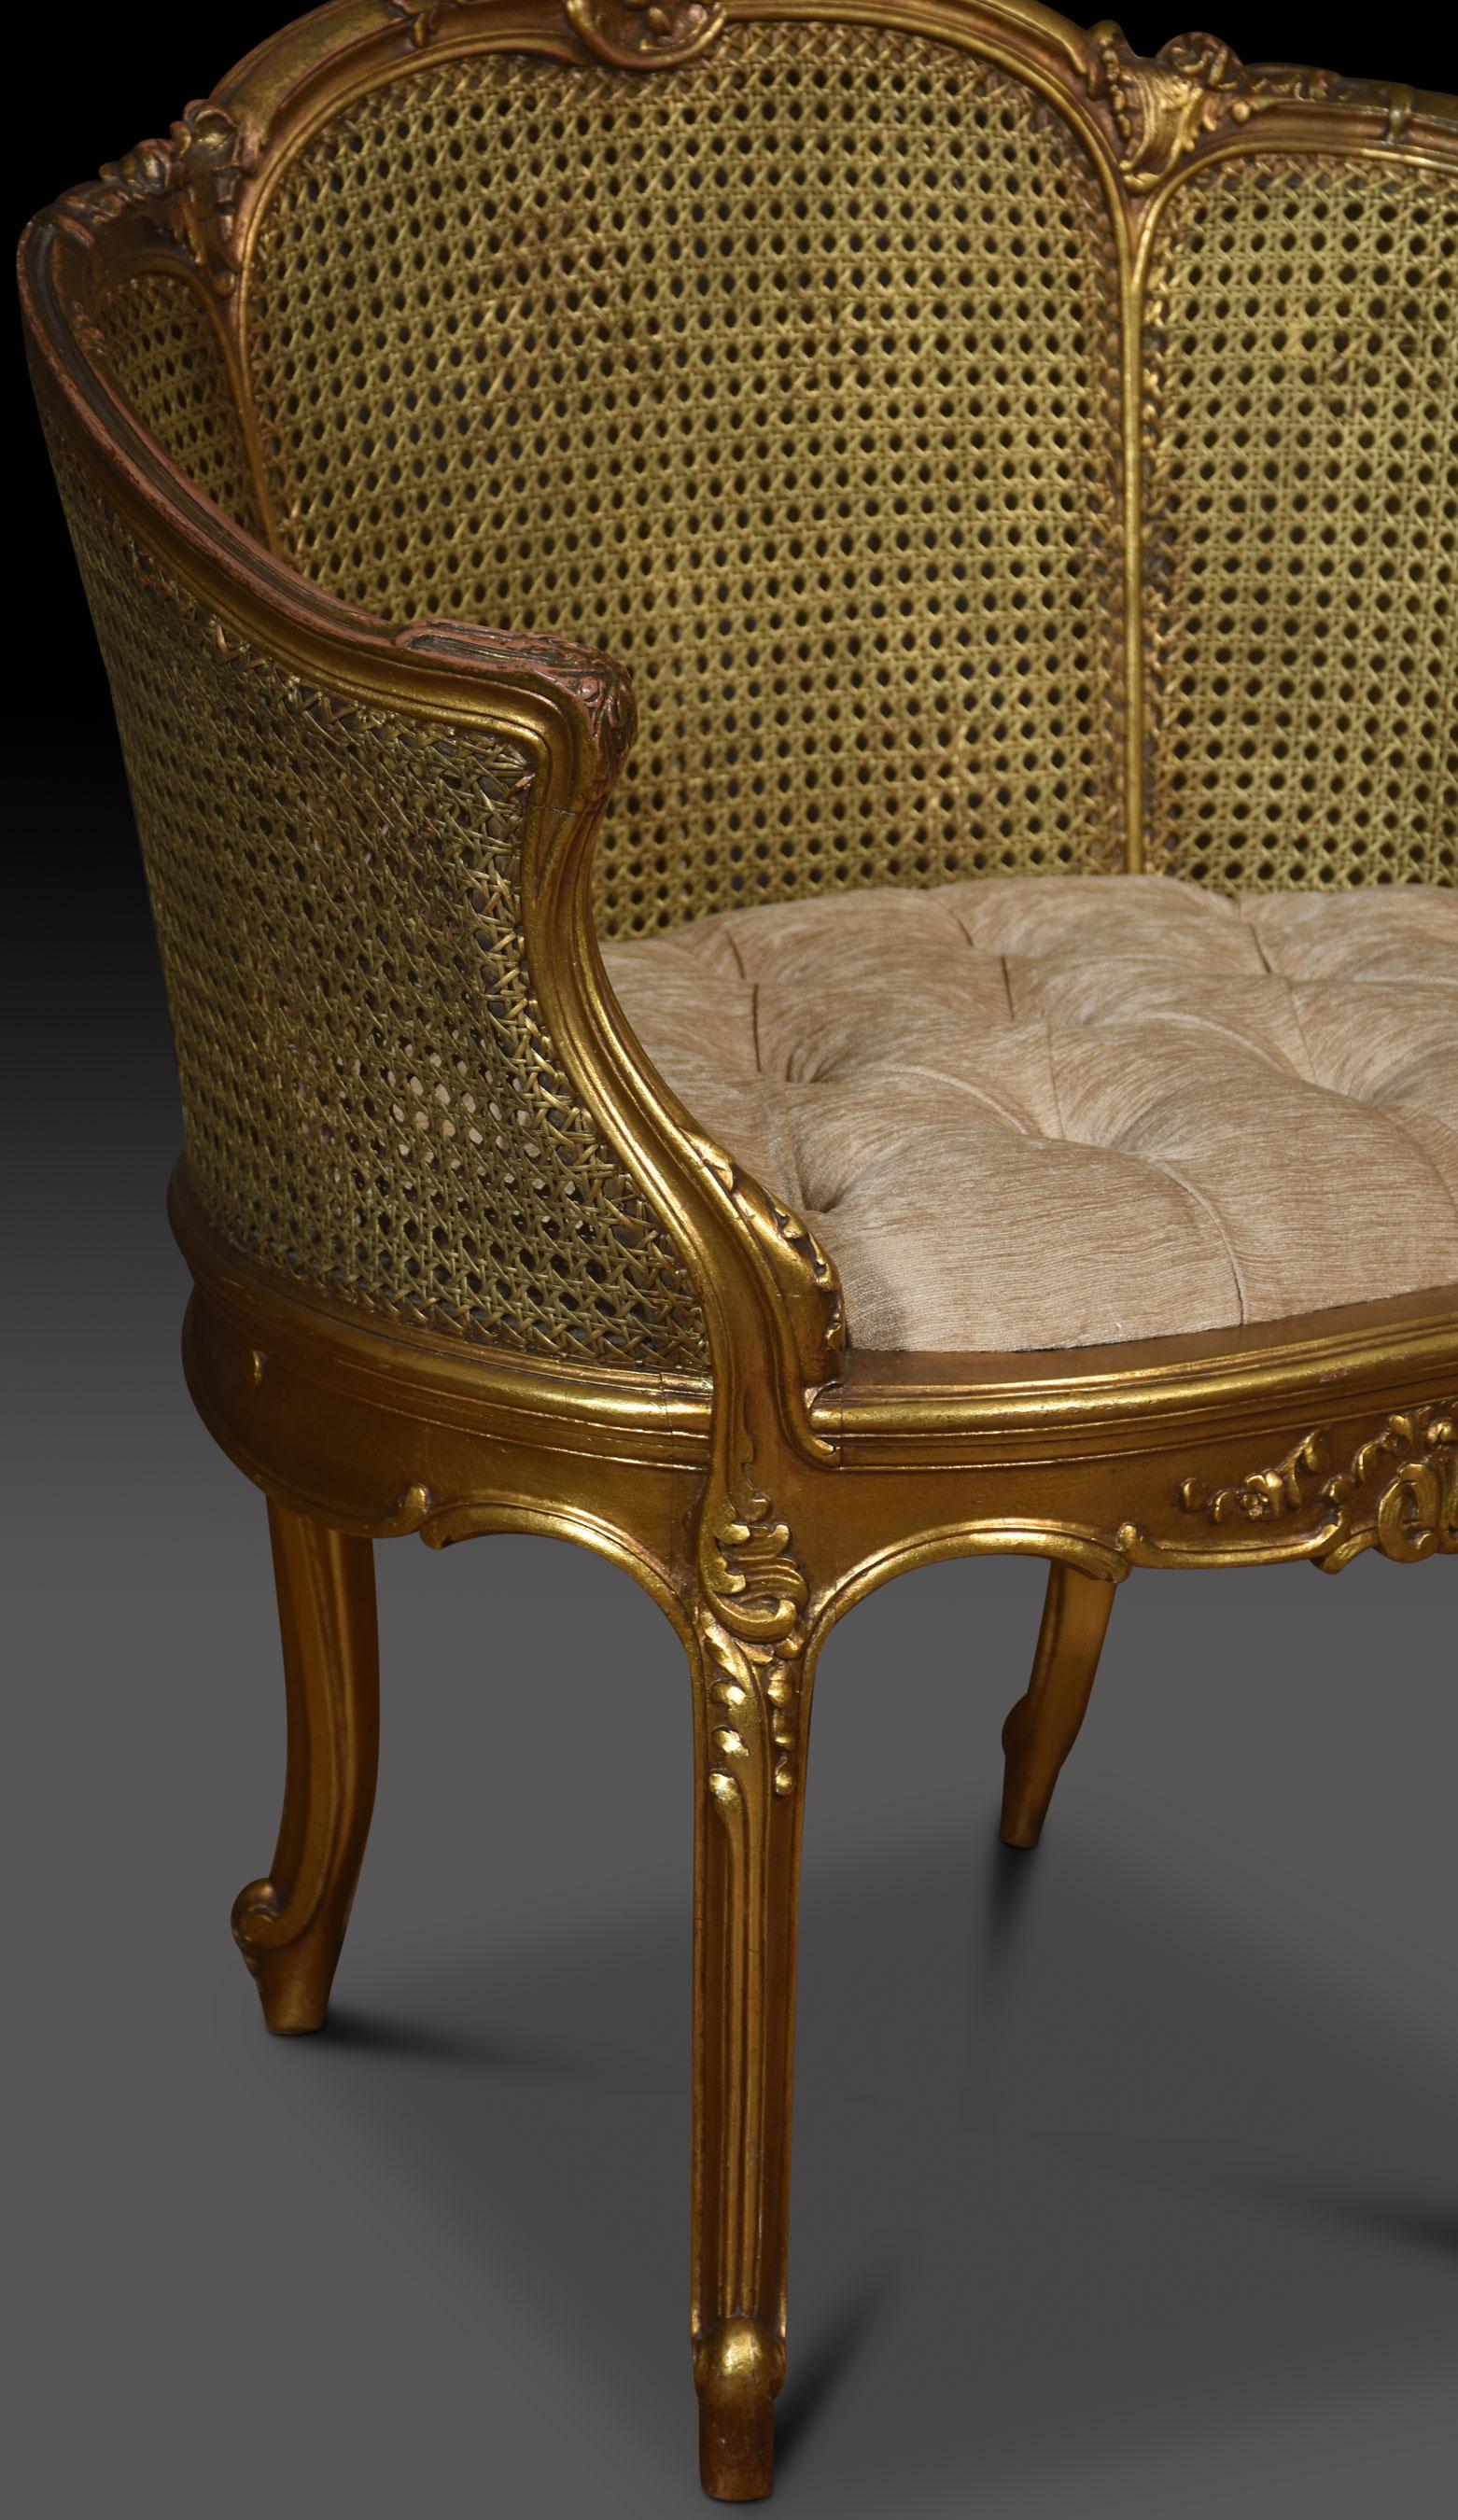 Pair of French Louis XVI style tub armchairs, the carved gilded rail in the typical manner of the period, the frame a repeating motif of detailed leaves. To the scrolling acanthus caped arms, flanking around the bergere back and arms, with